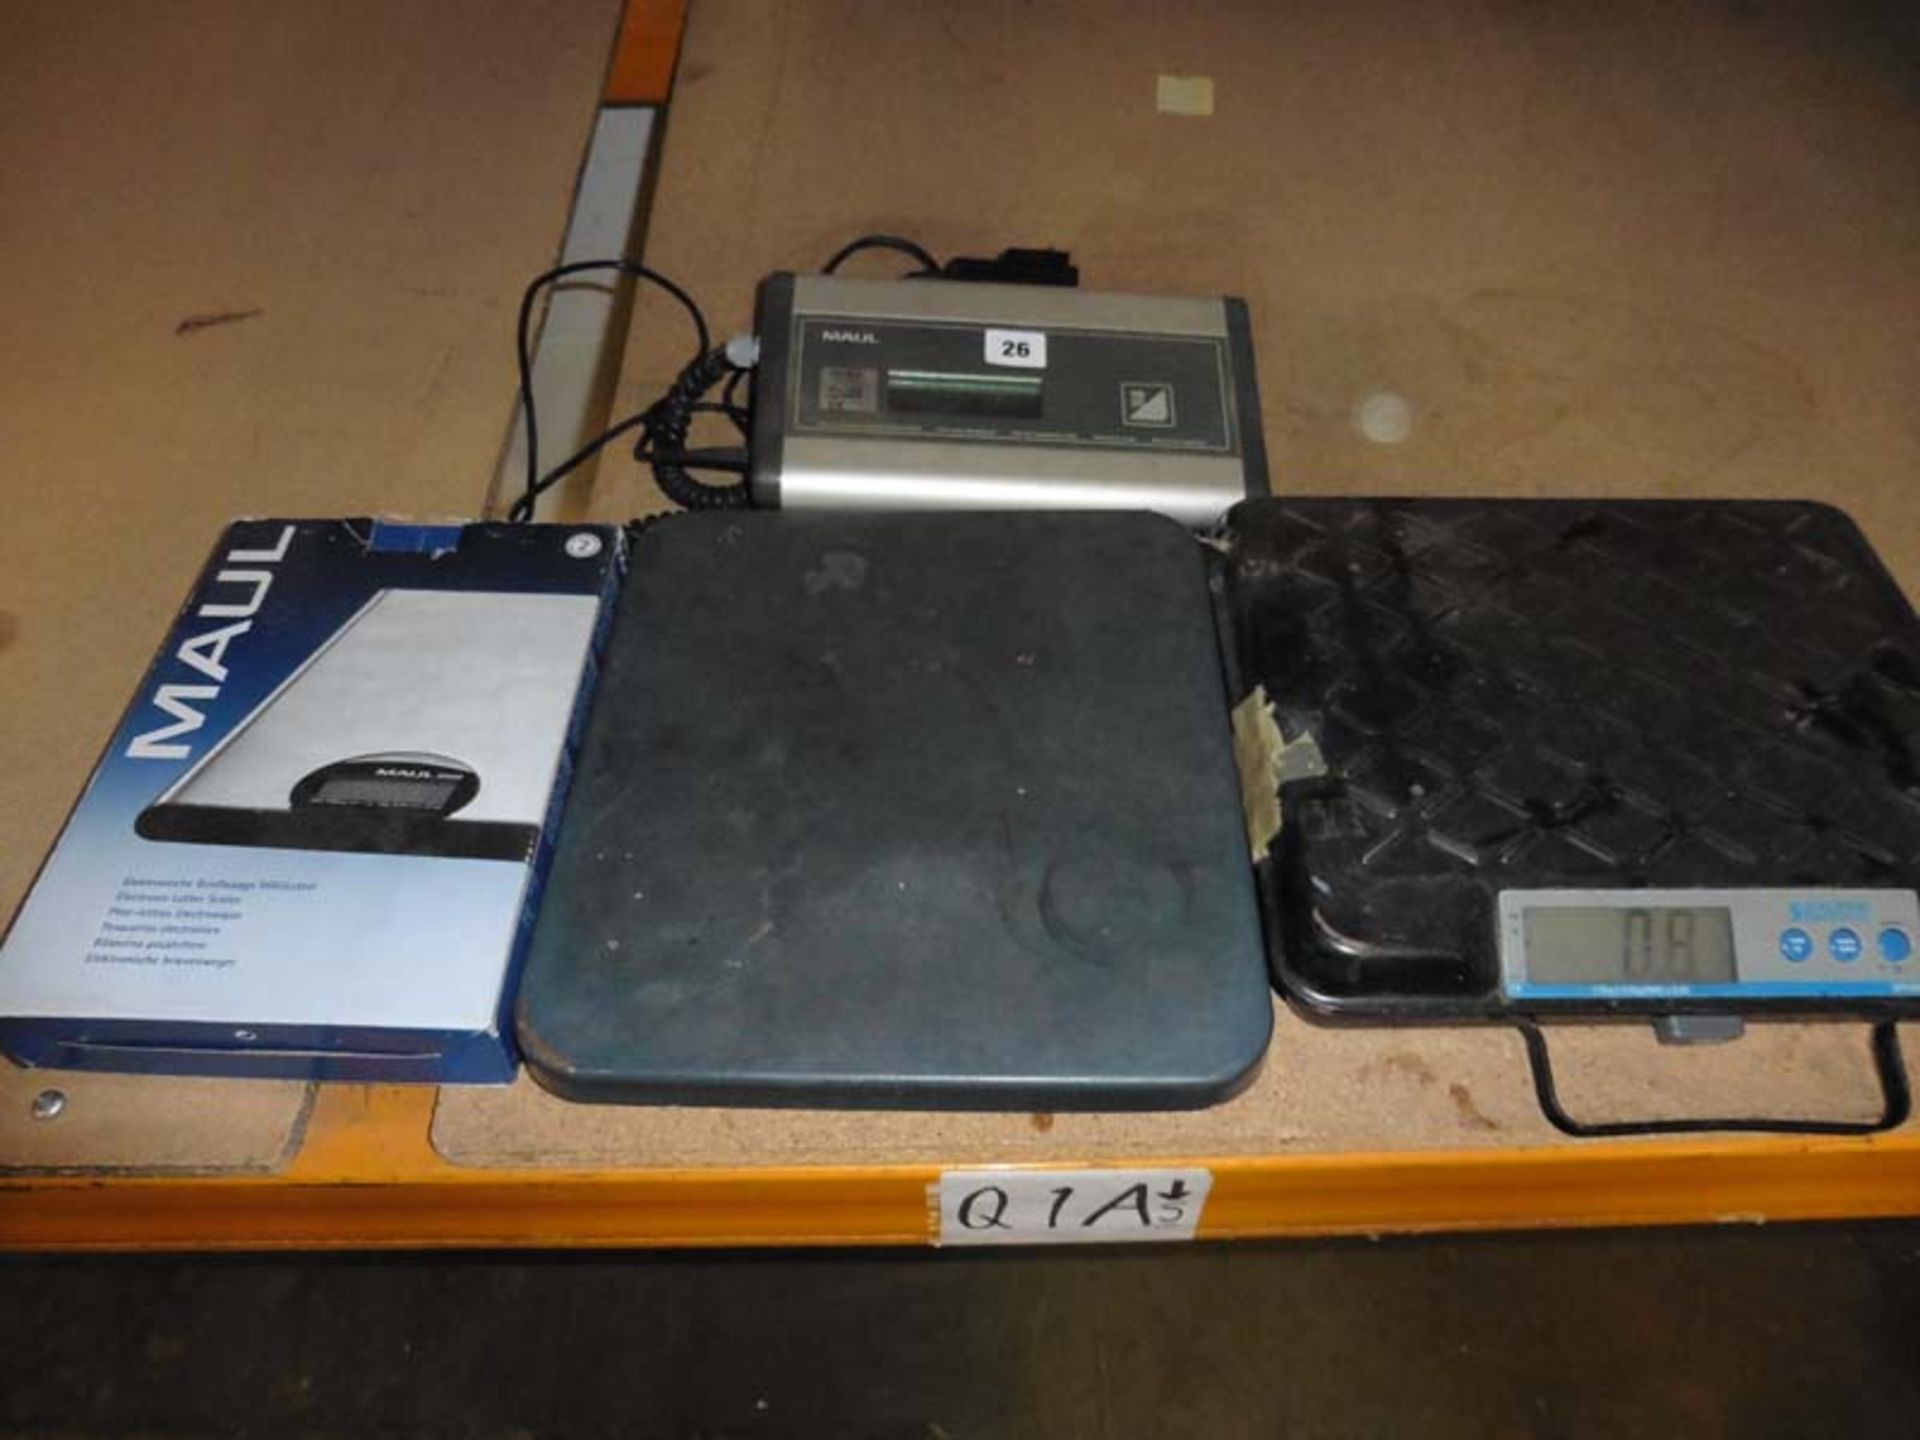 Maul 25KG digital platform scales with letter scales and Salter 110KG scales